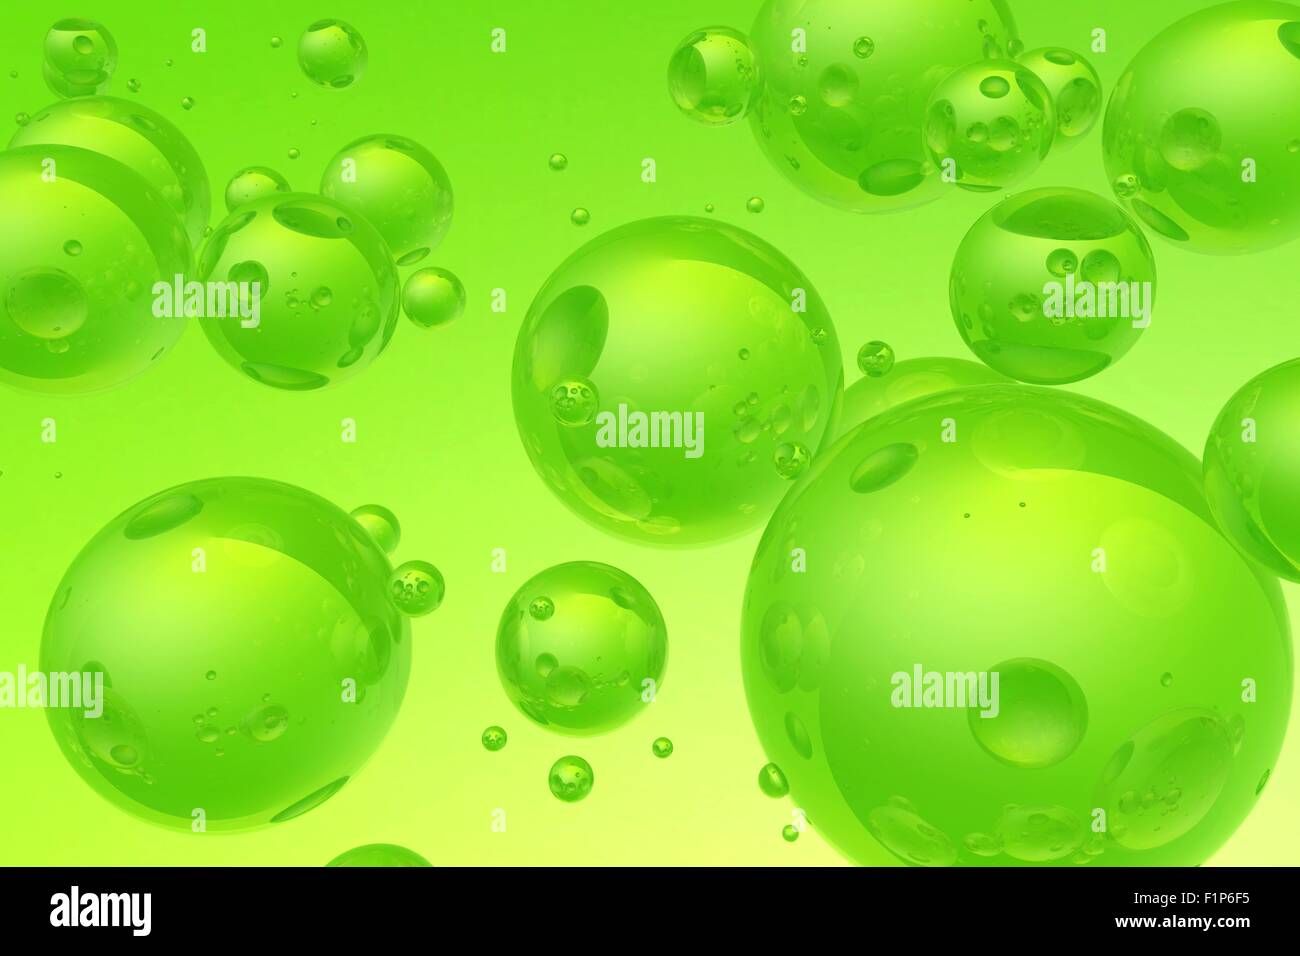 Cool Realistic Green Bubbles Background. 3D Render Illustration Stock ...